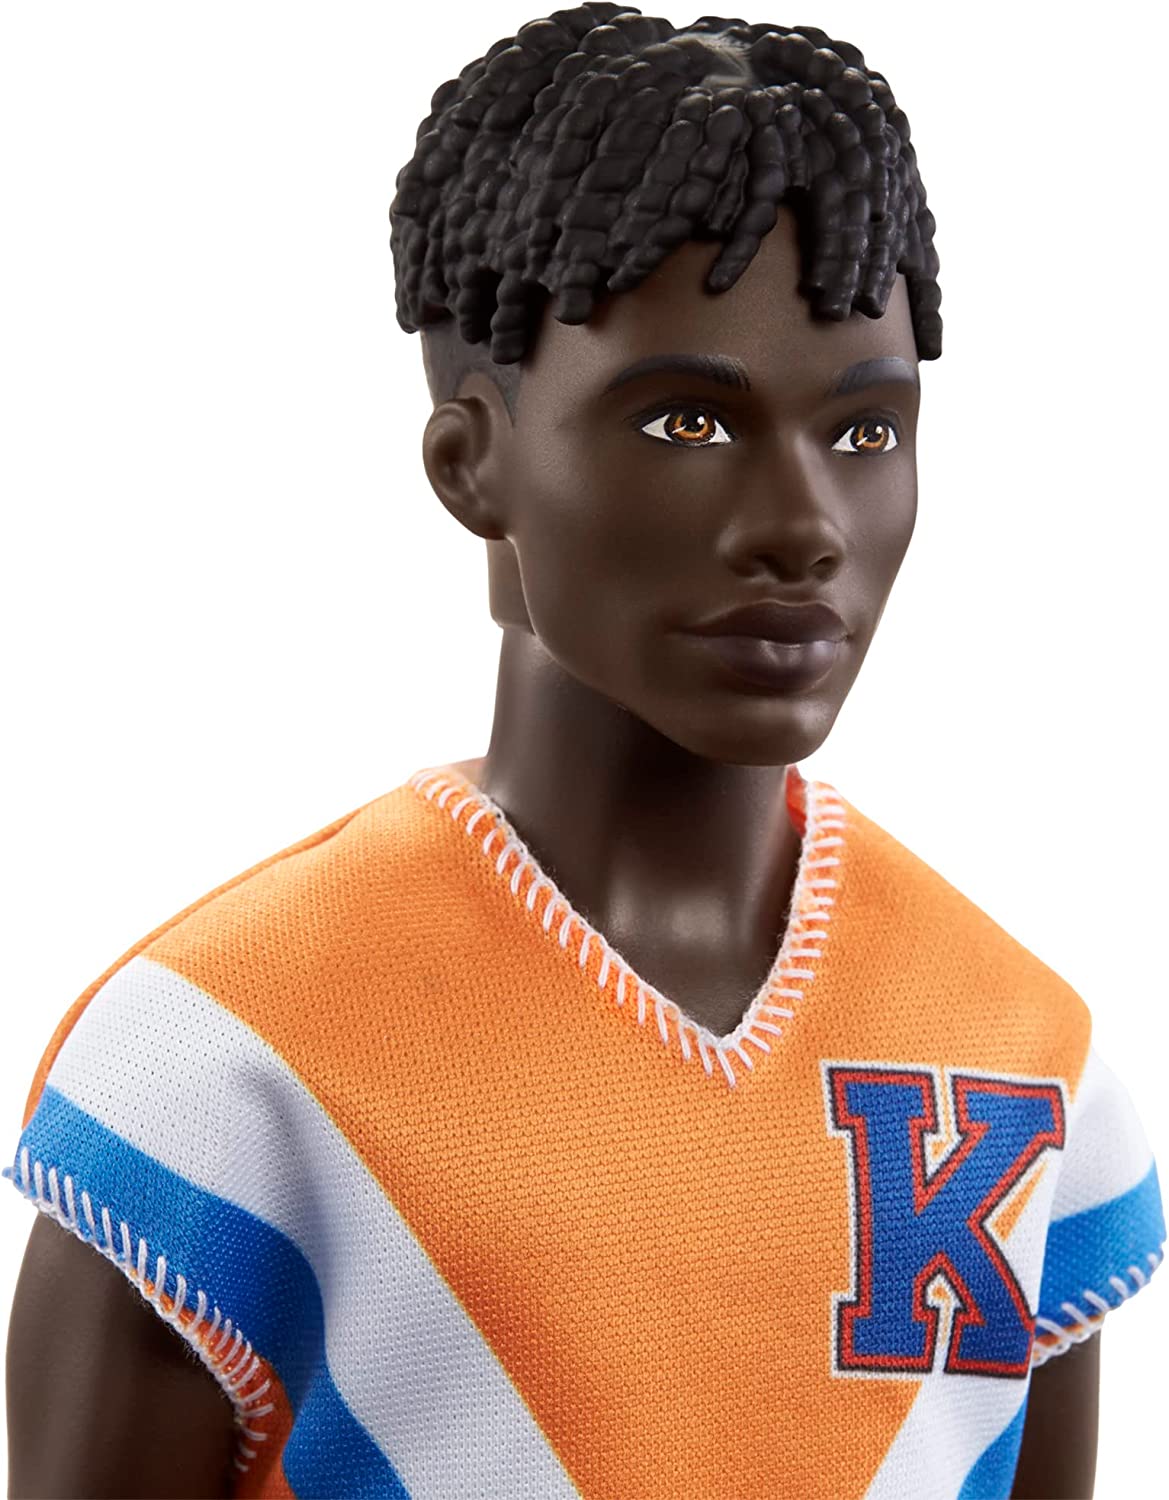 Barbie Ken Fashionistas with Twisted Black Hair Wearing Trendy Fit with A Sporty Jersey and Shorts #203 for Kids Ages 3+